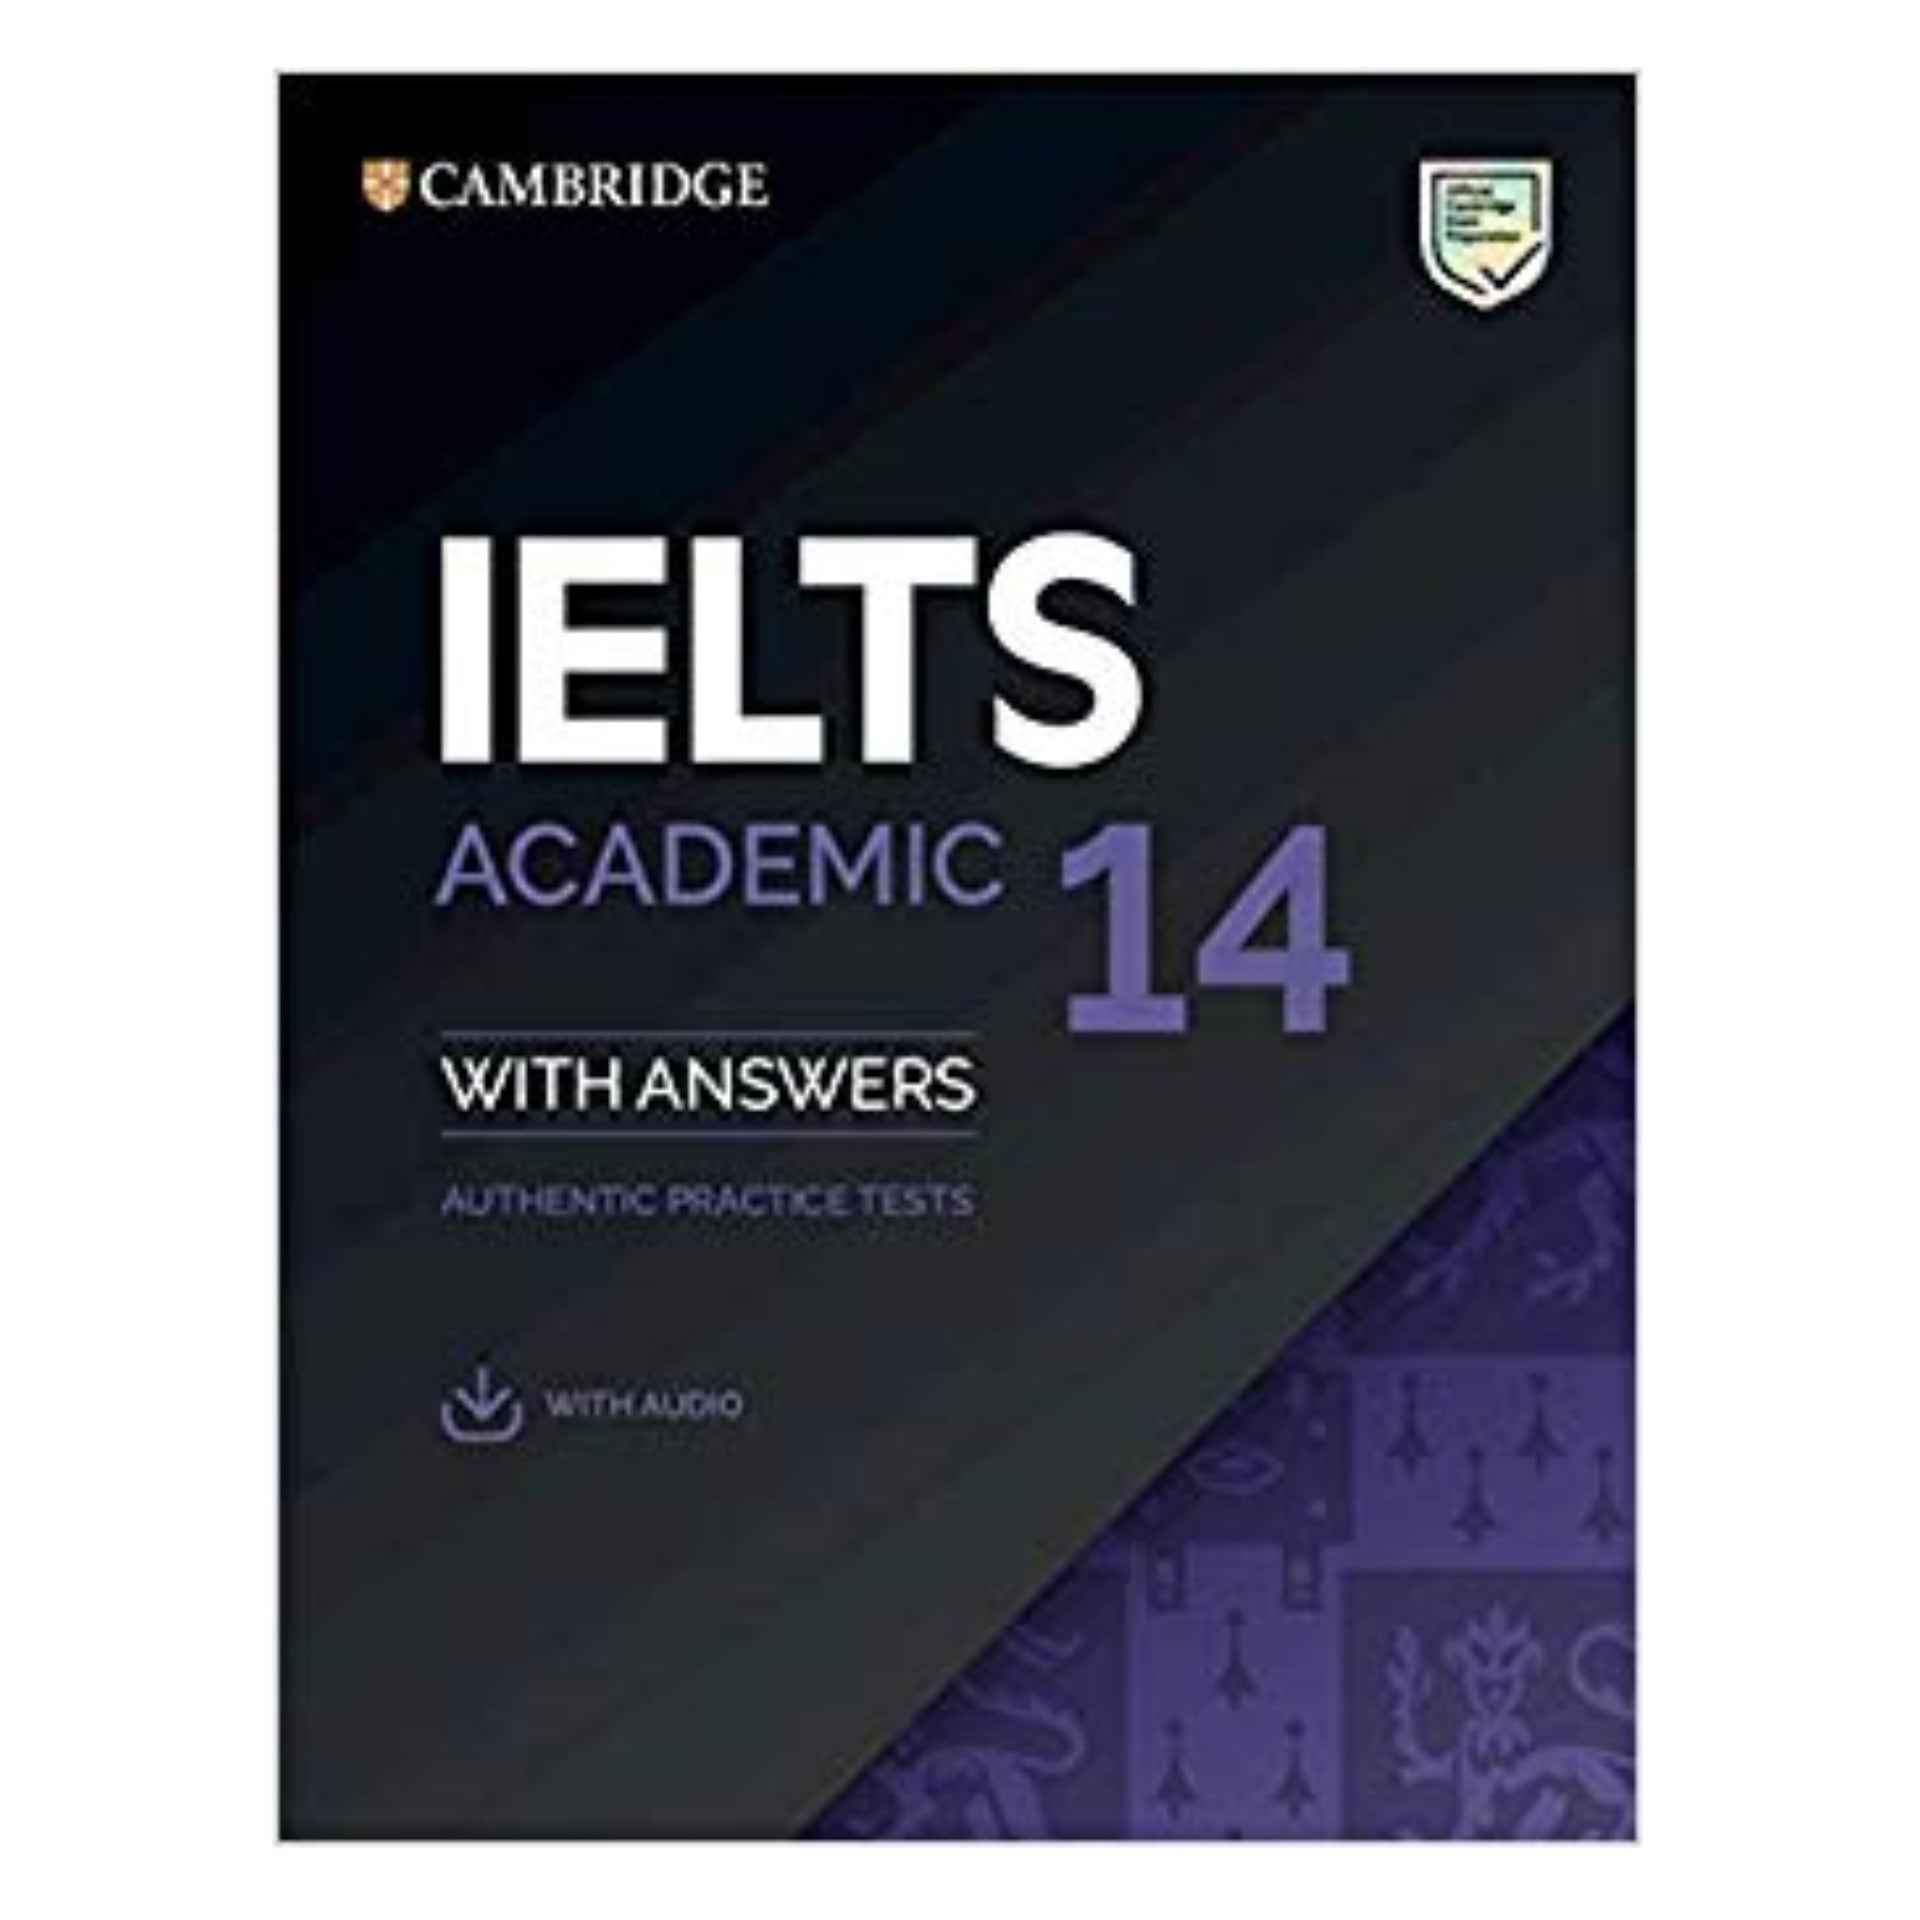 Cambridge IELTS 14 Academic with answers (With Audio)